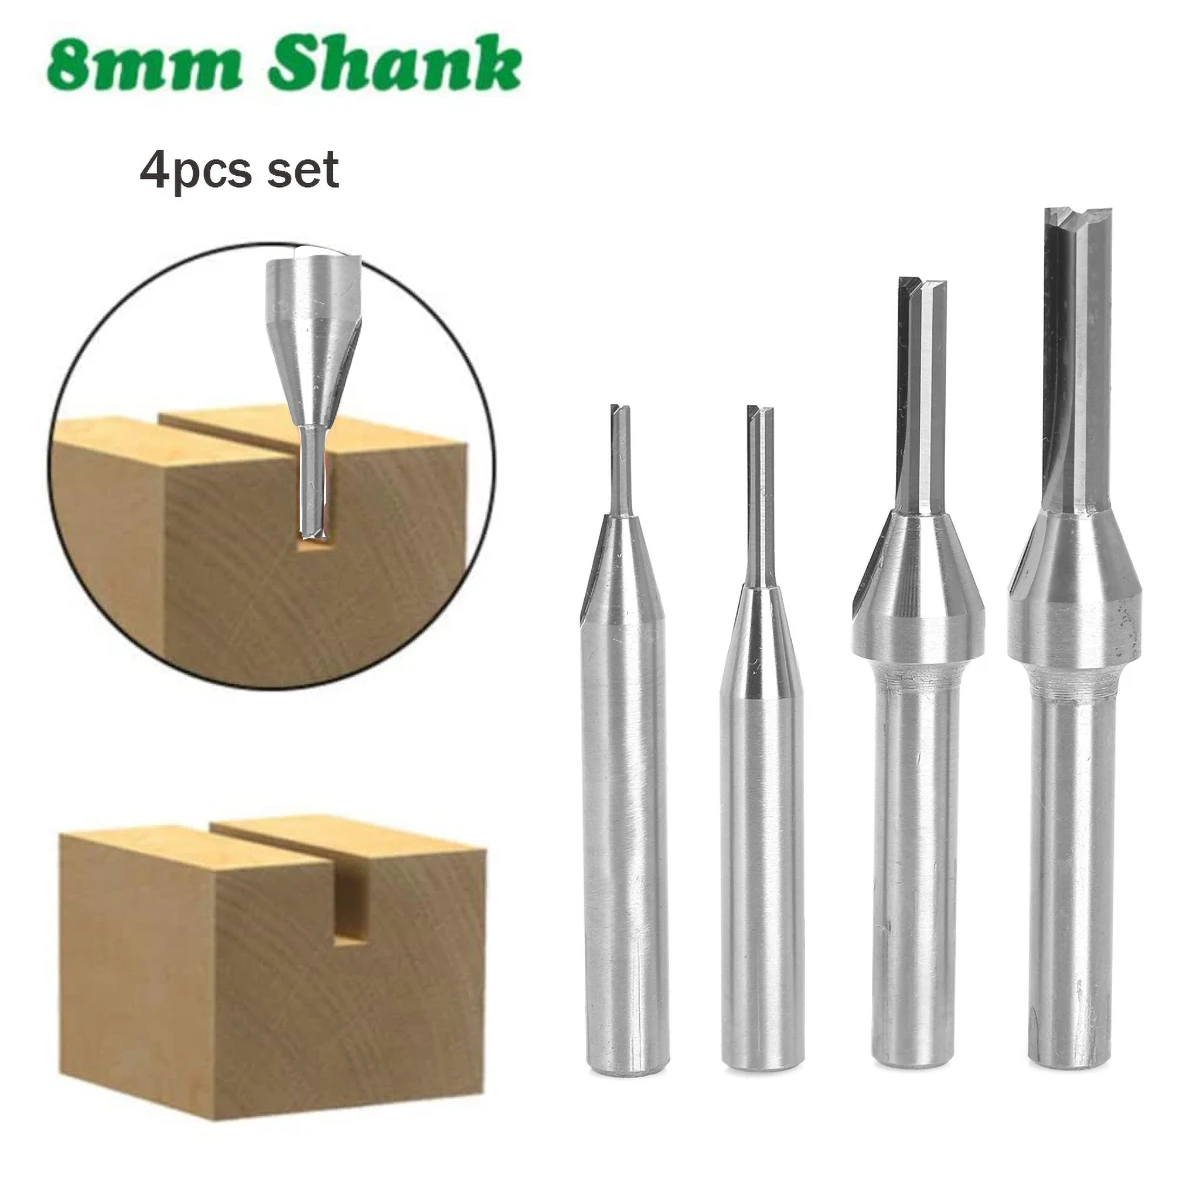 

4 Pcs 3 Flutes TCT Straight End Mill Woodworking CNC Tool Carbide Cutters 1/2 Shank Router Bit For Wood MDF Plywood Chipboard